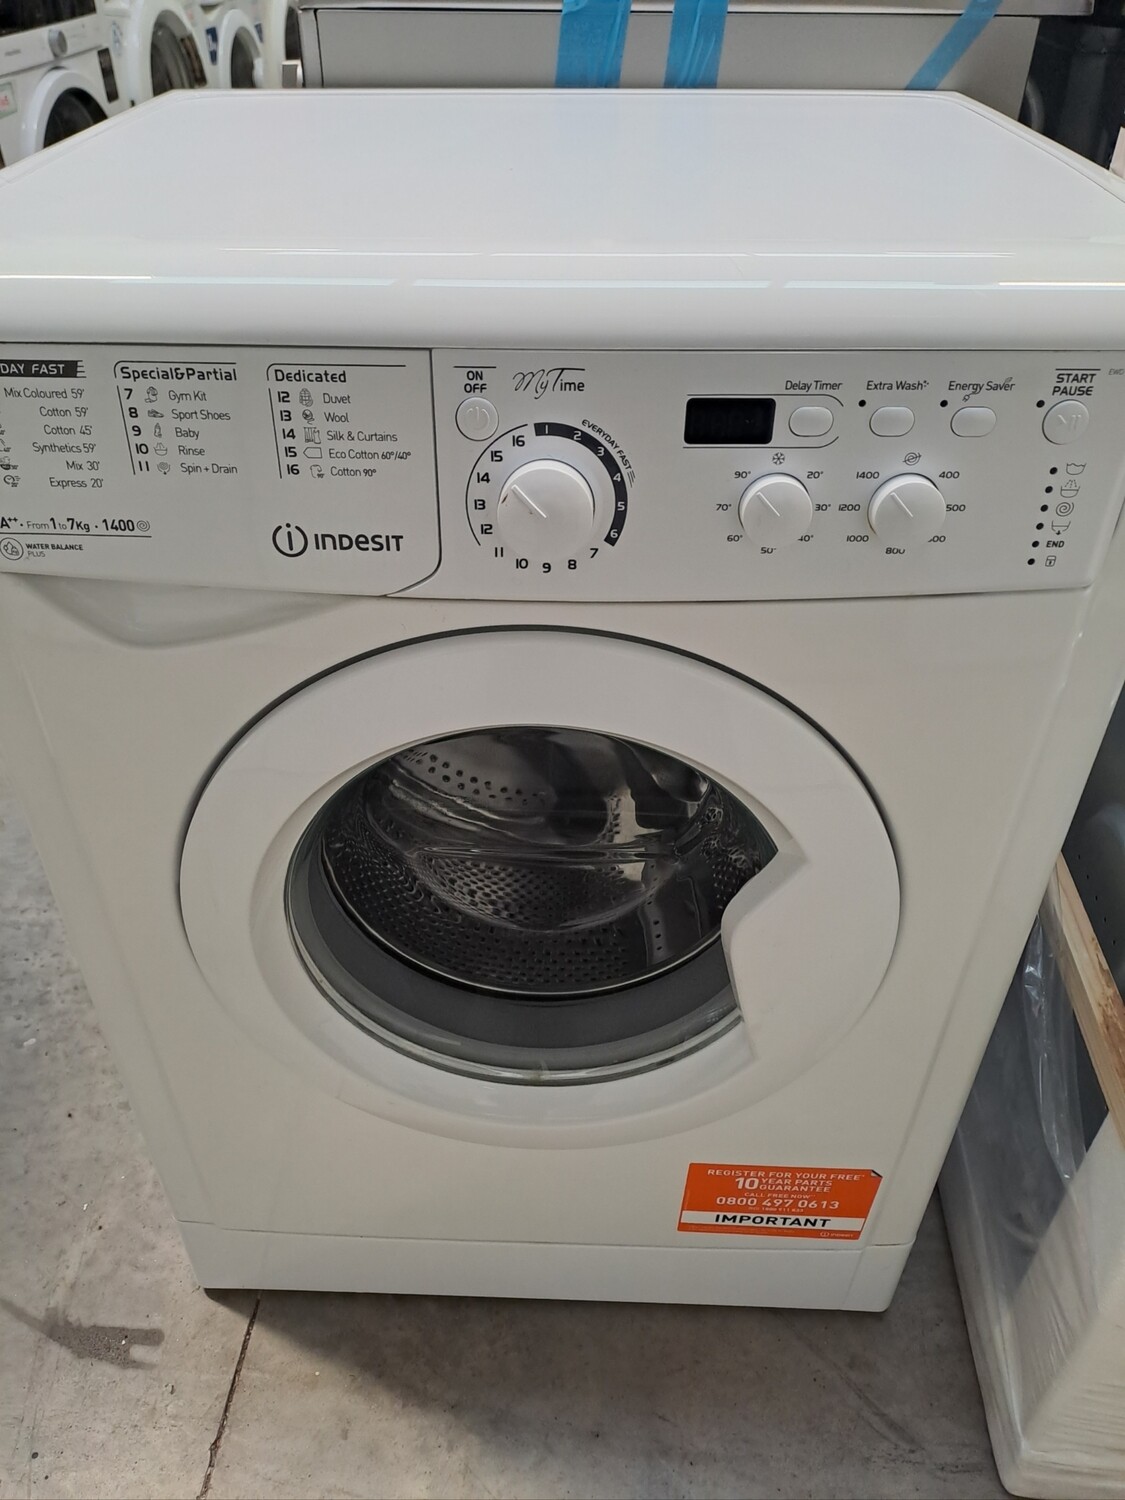 Indesit EWD71452 7kg Load 1400 Spin Washing Machine - White - Refurbished - 6 Month Guarantee. This item is located in our Whitby Road Shop 